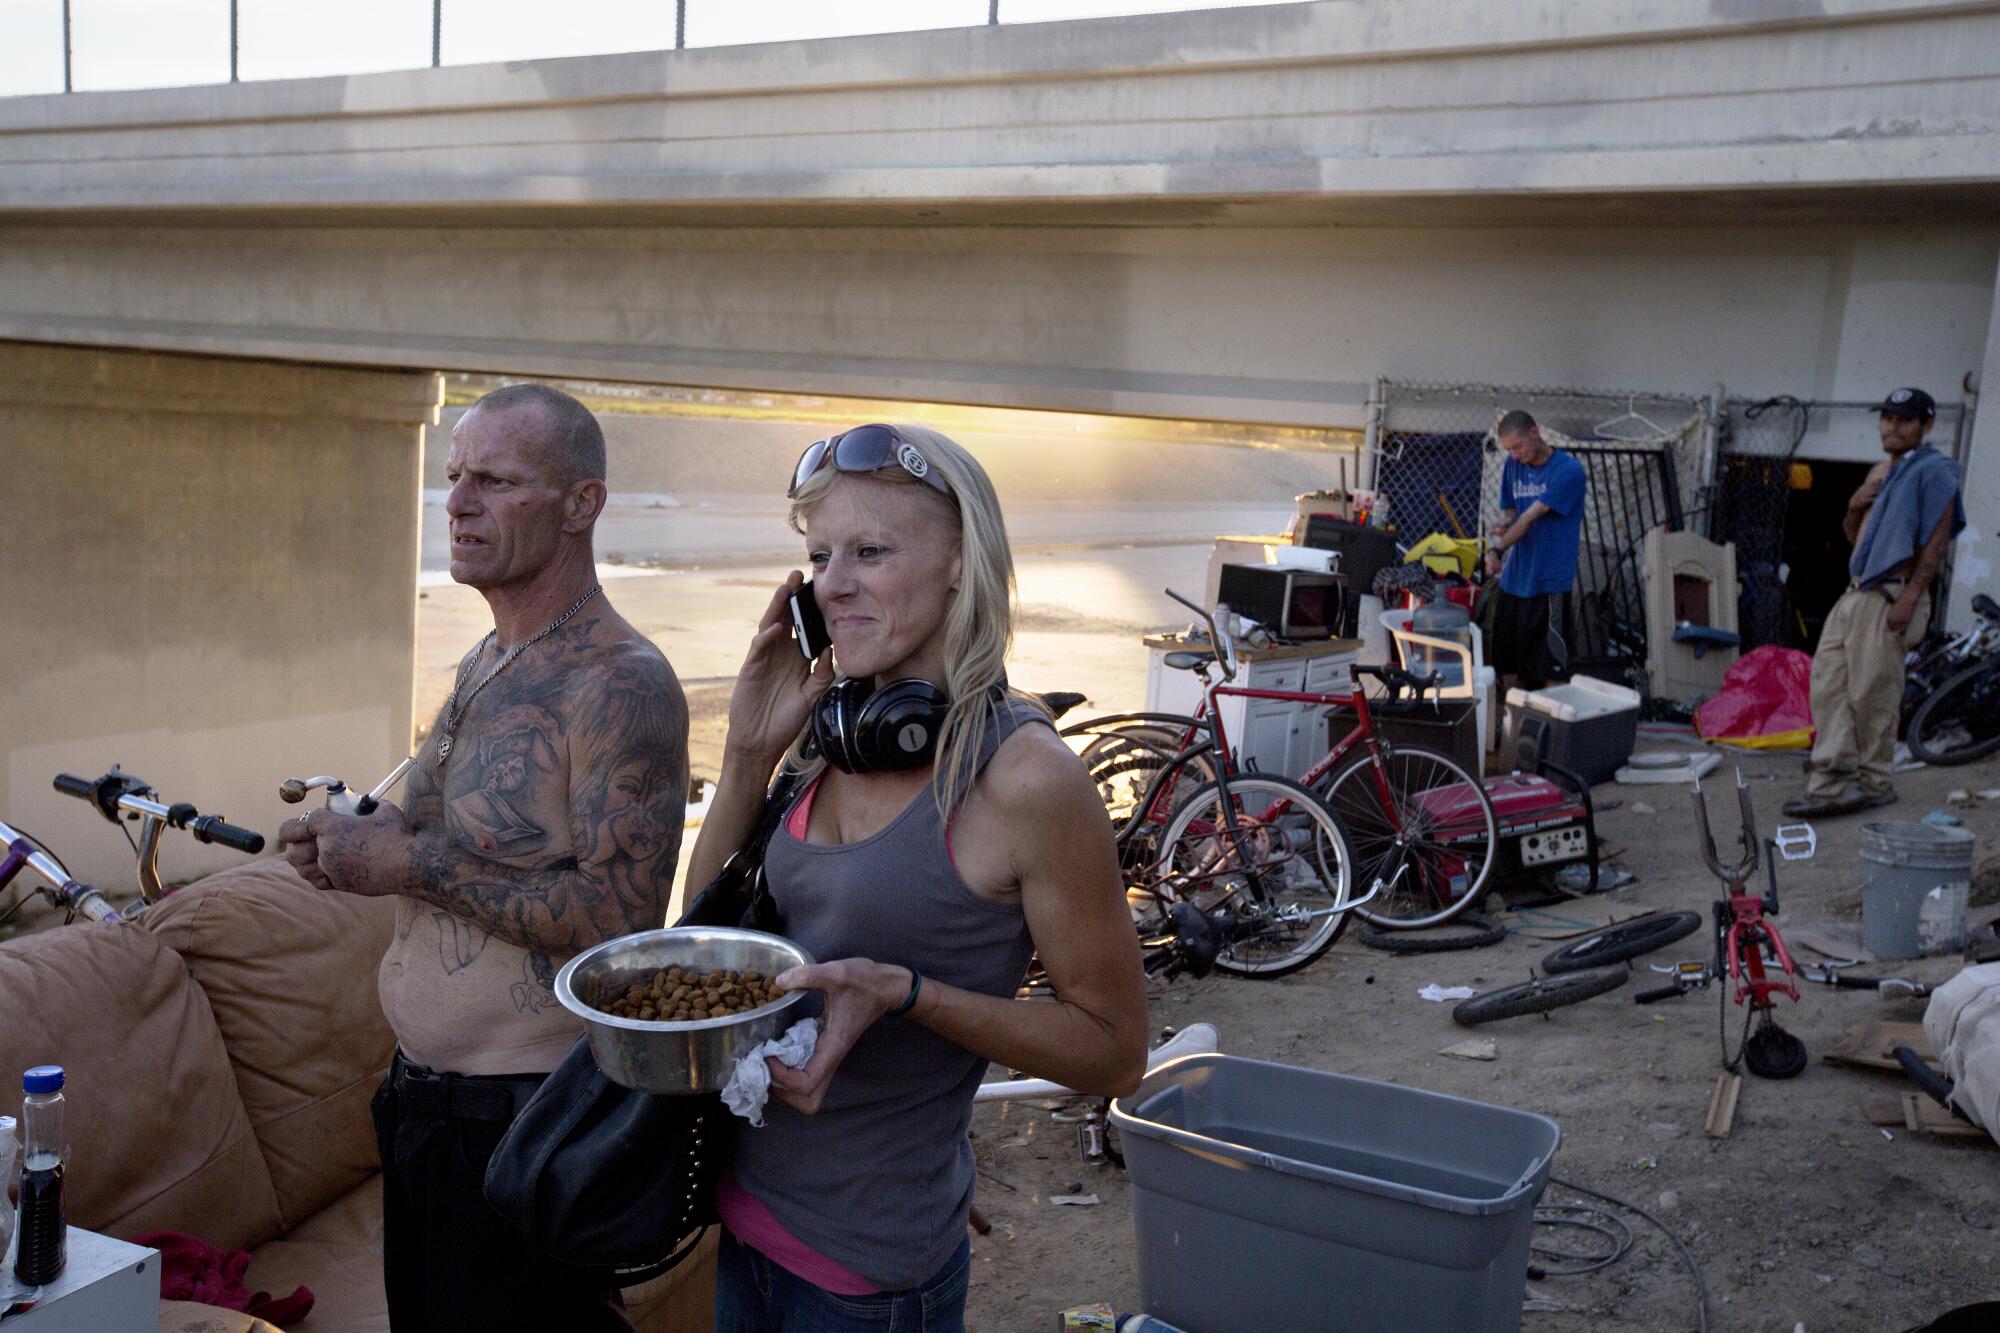 Kenneth Colato, 49, known as Rabbit, stands with Lauren, 33, in front of his home underneath a bridge along the L.A. River.